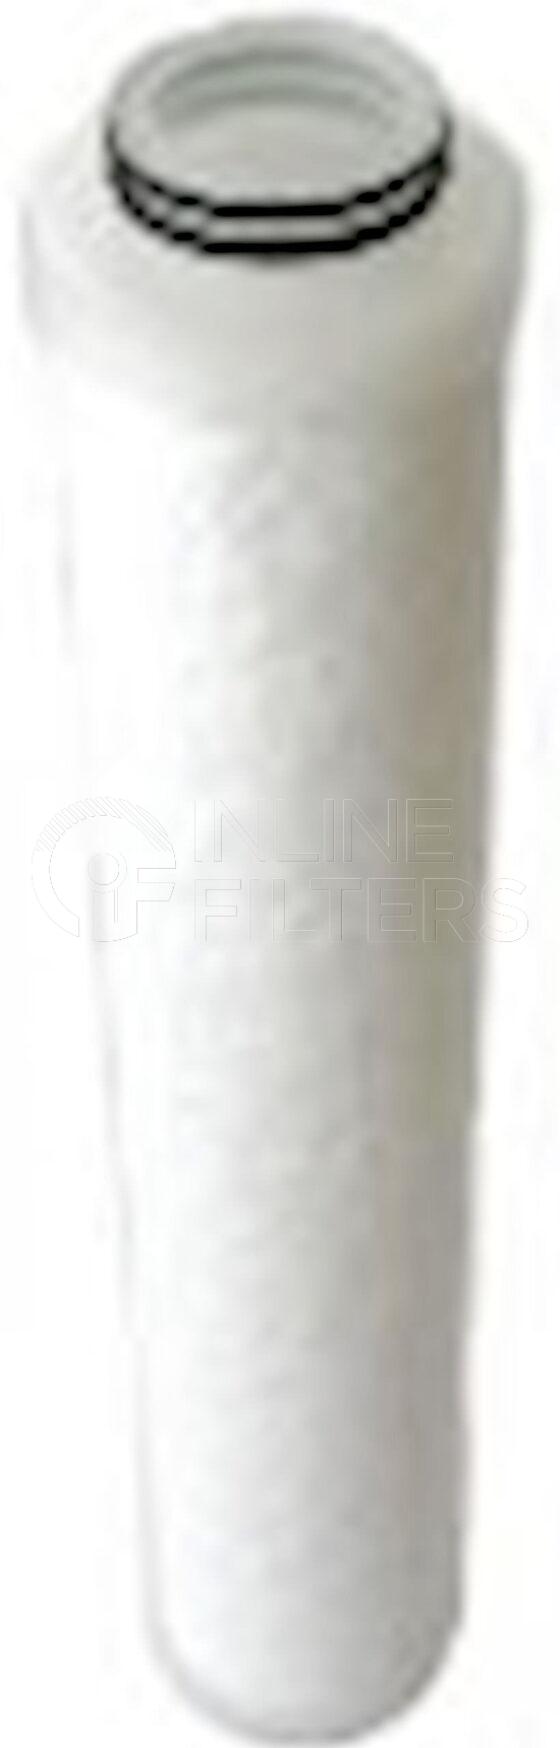 Inline FW90101. Water Filter Product – Brand Specific Inline – Undefined Product Water filter product